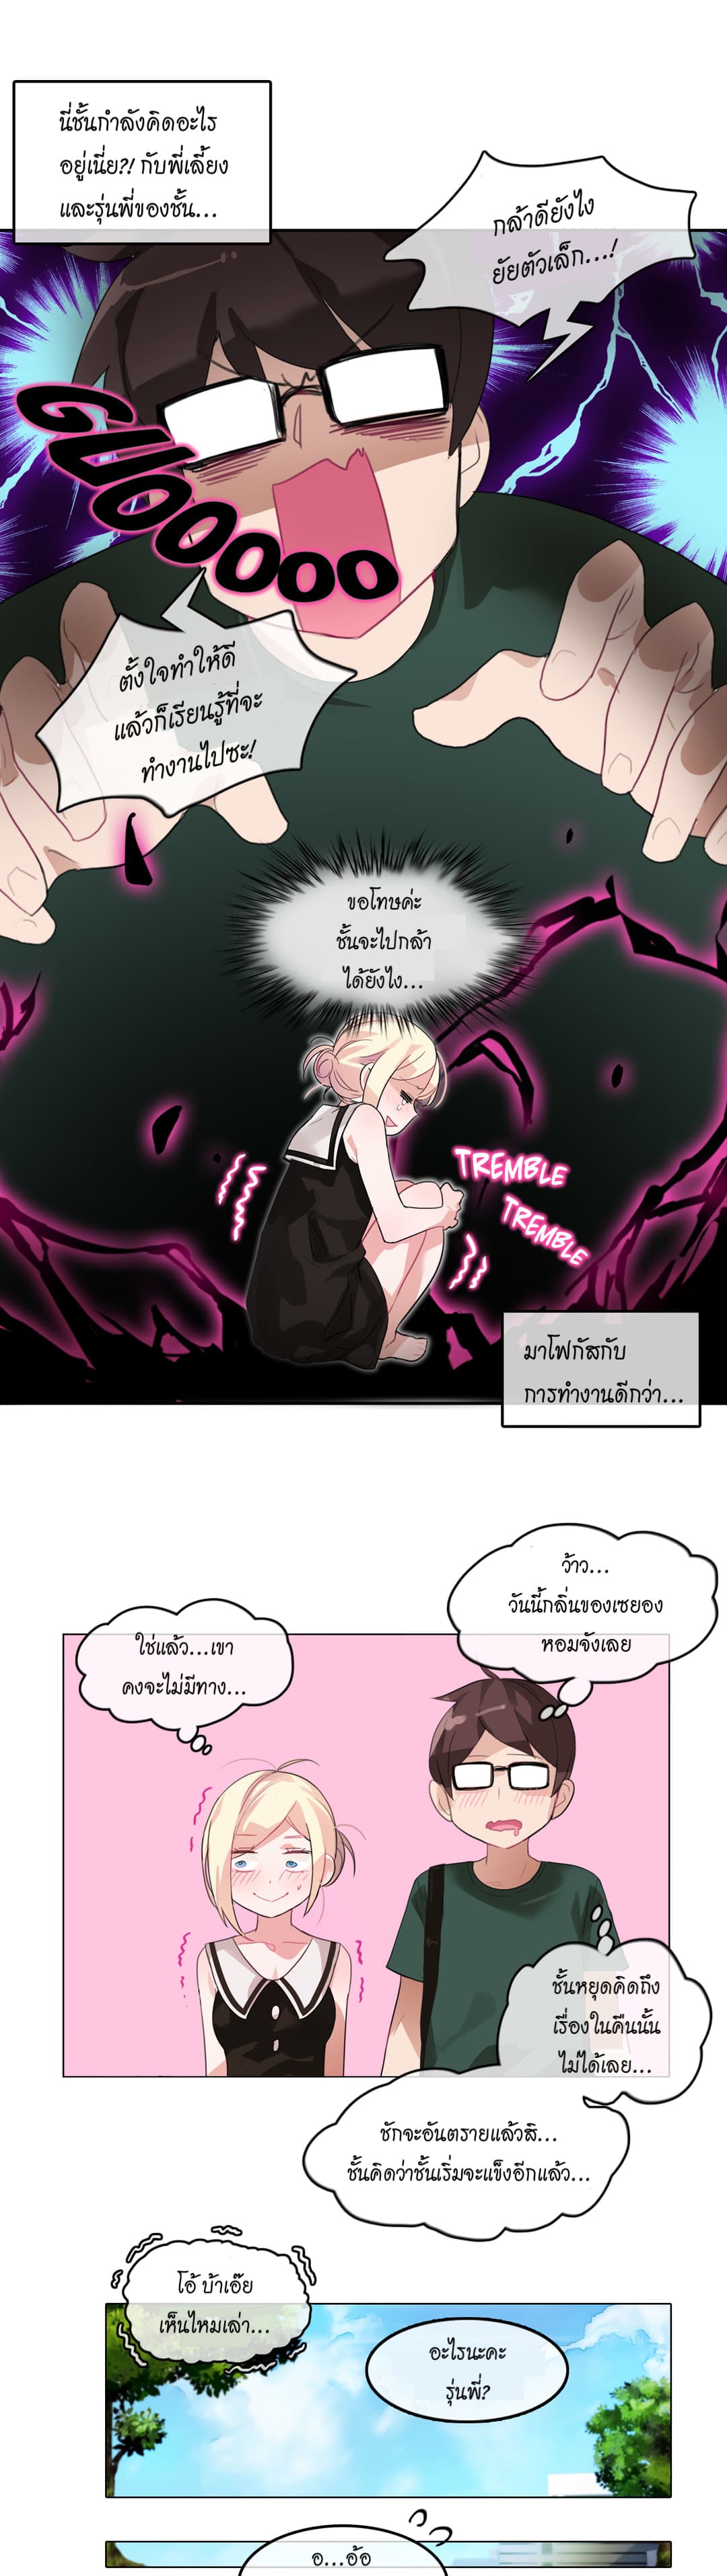 A Pervert’s Daily Life 13 (3)